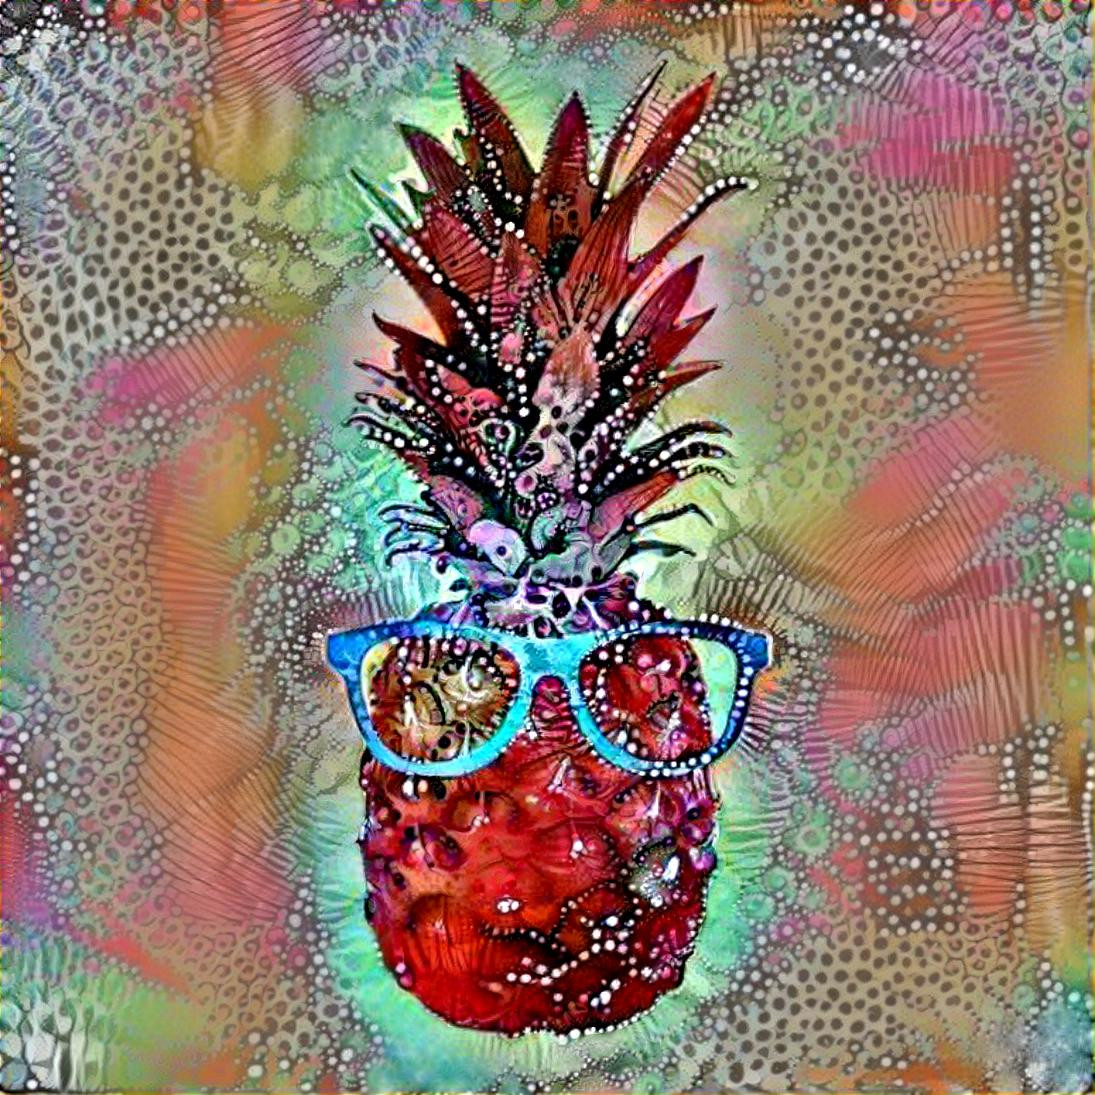 Fruit with glasses